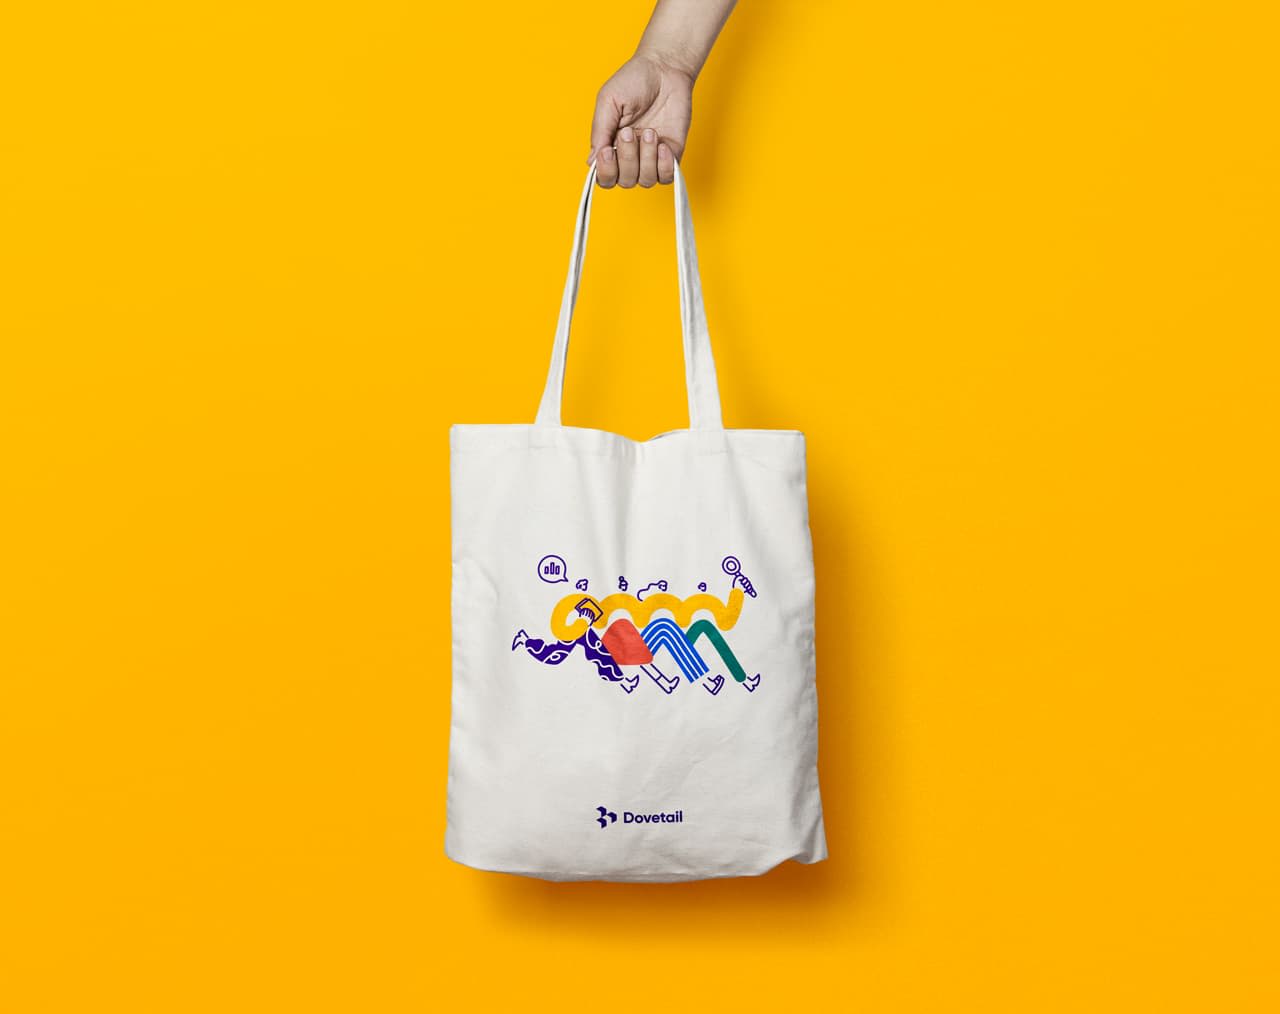 New Dovetail swag is coming soon! I mean, who doesn’t love a good tote?